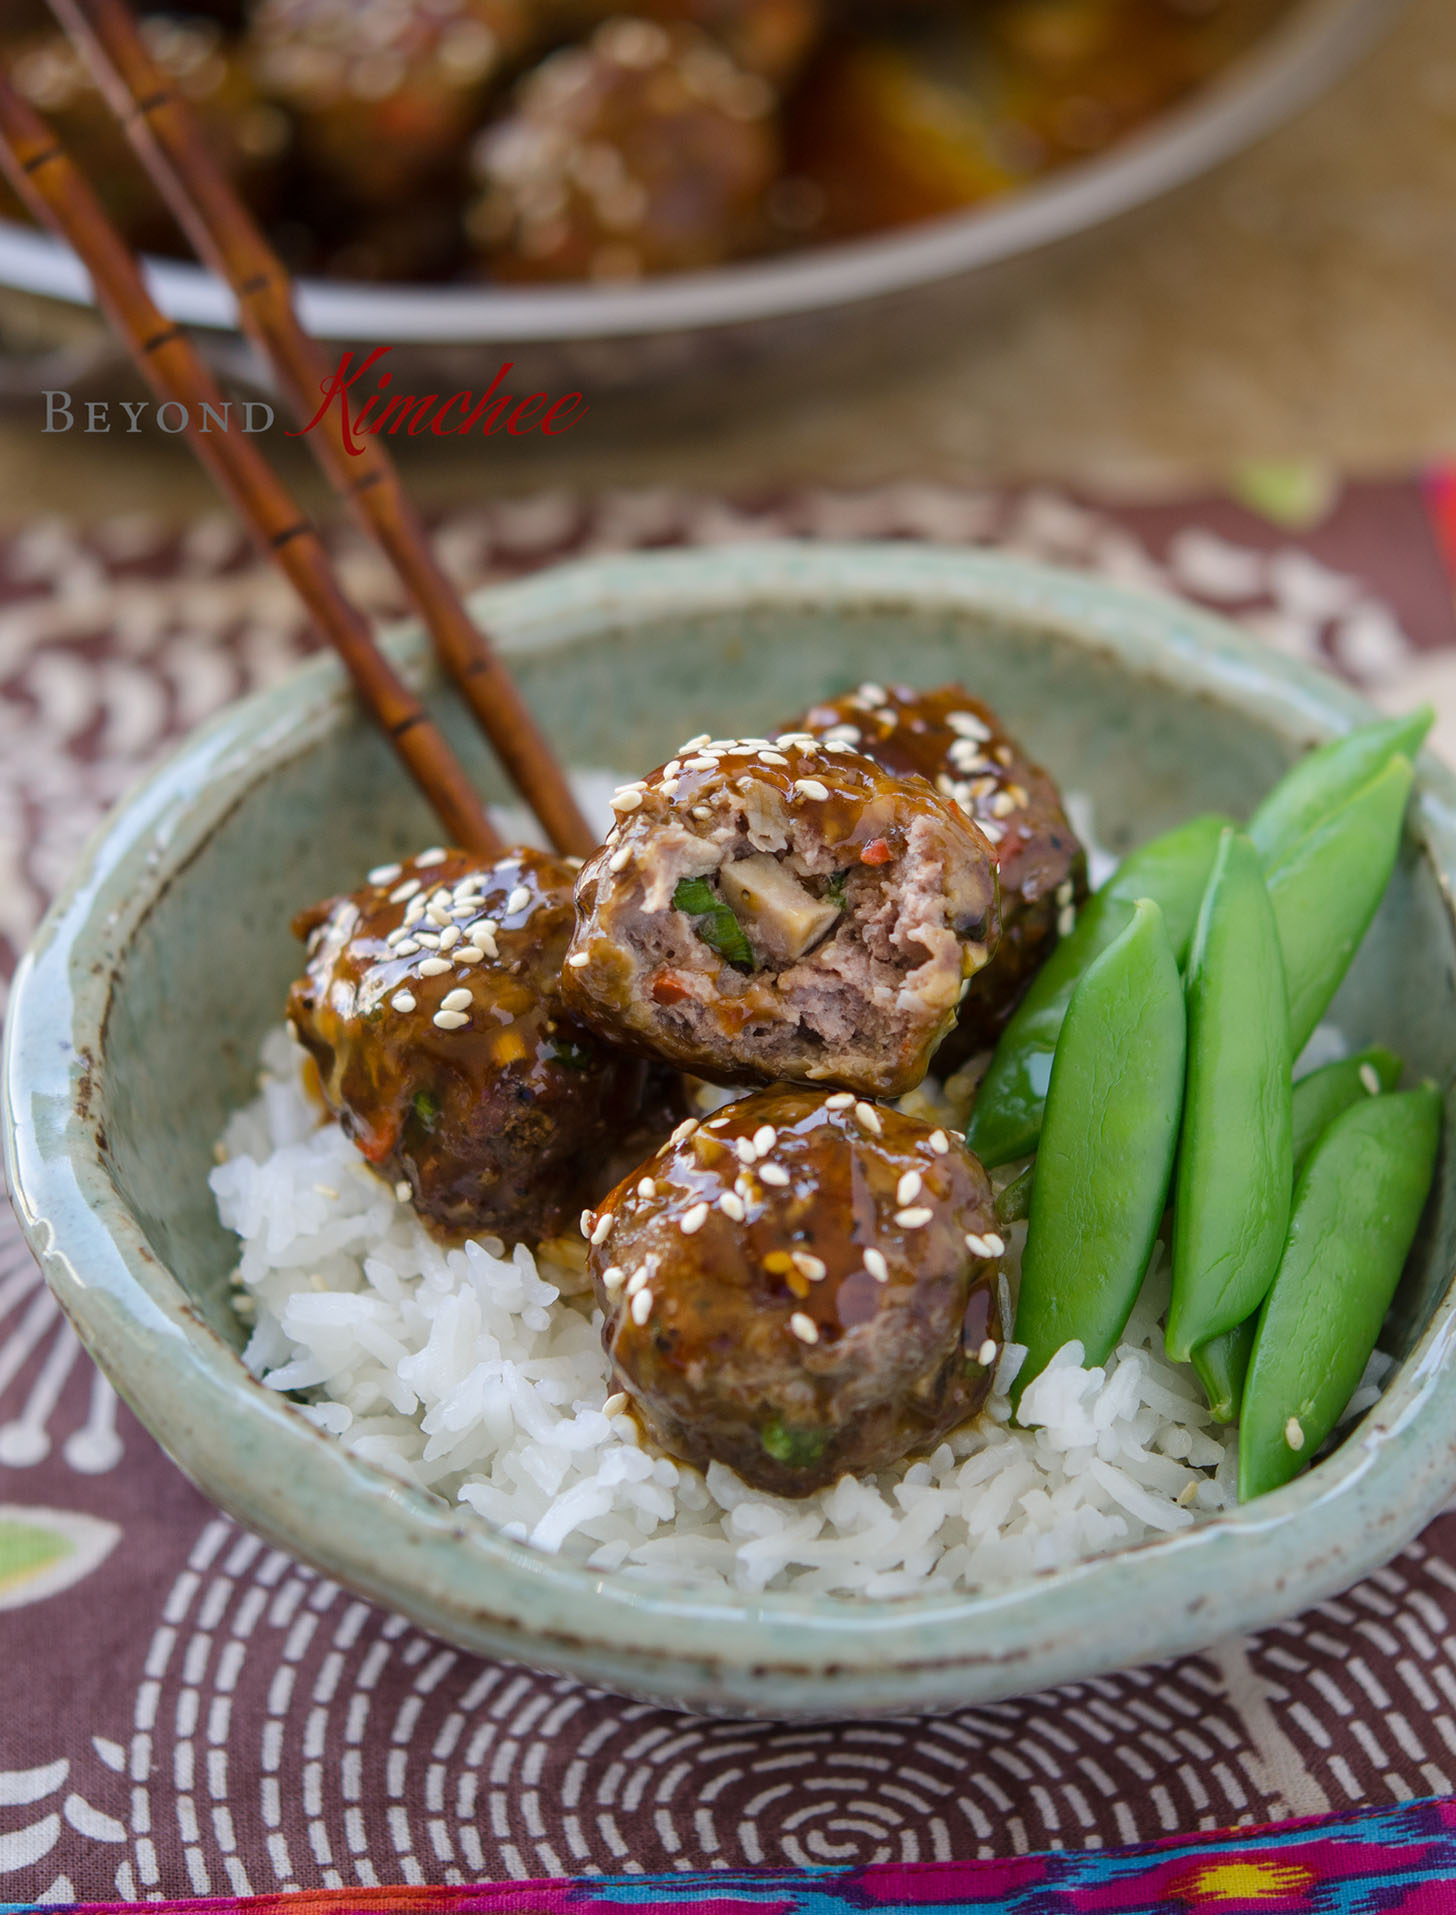 Beef meatballs with rice and snow peas.